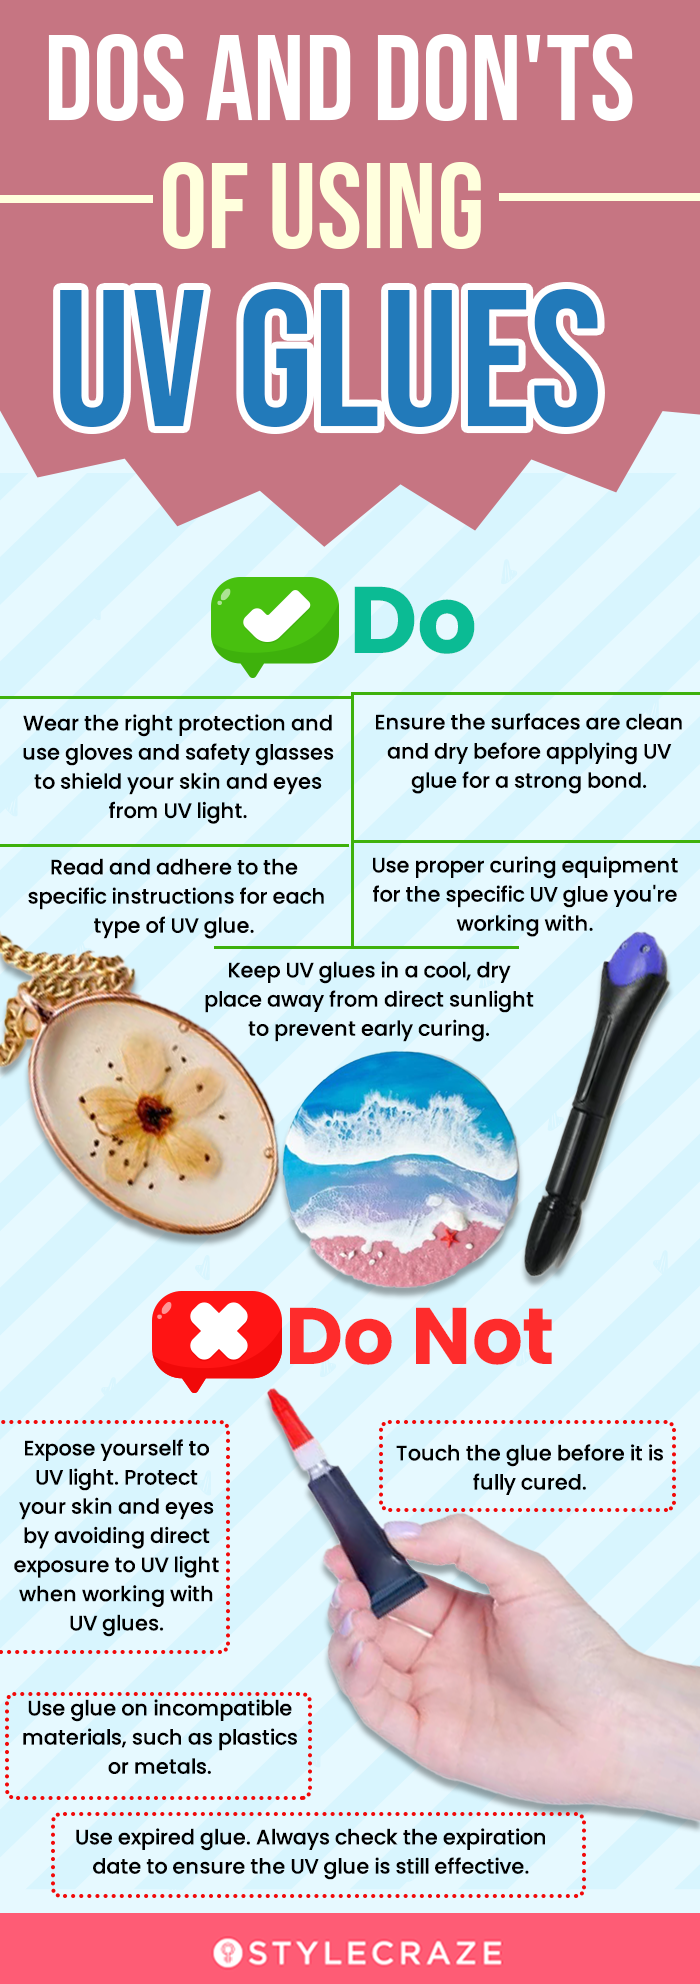 Dos And Don'ts Of Using UV Glues (infographic)